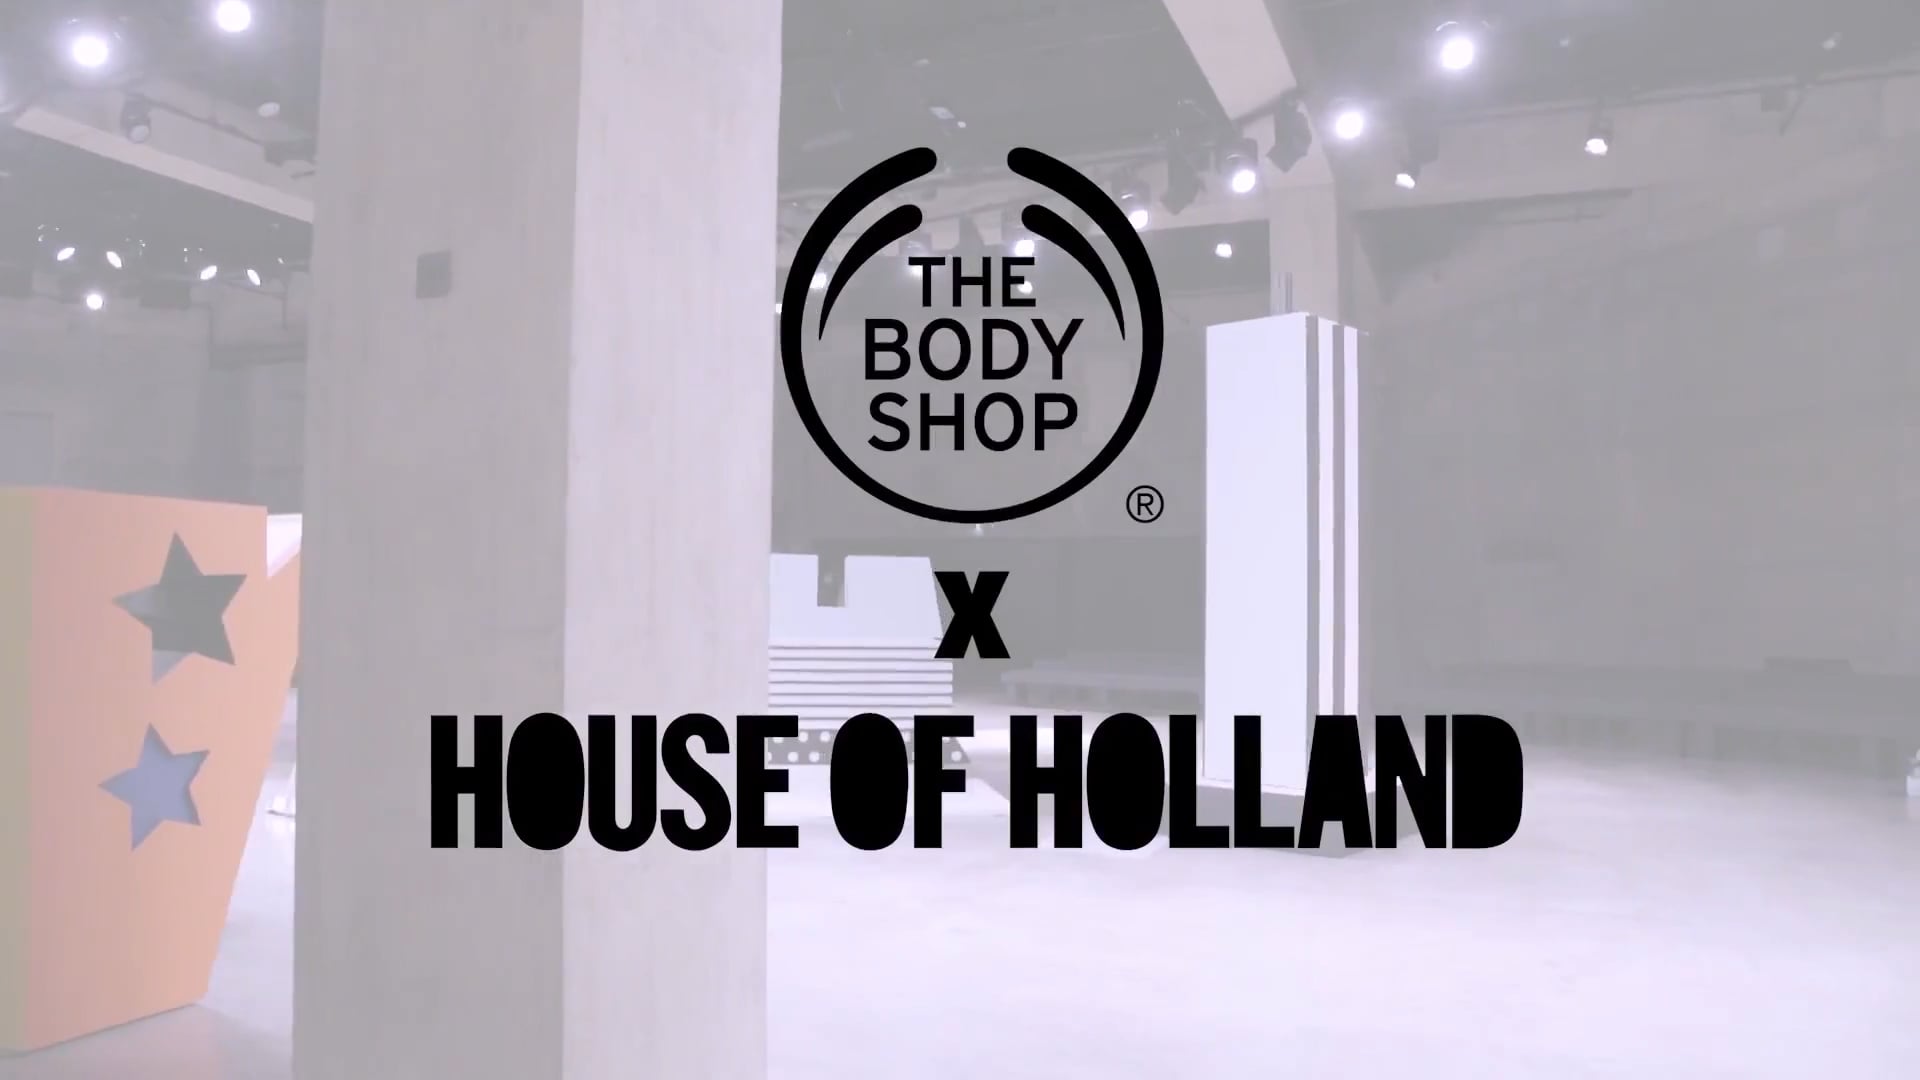 House of Holland at London Fashion Week for The Body Shop